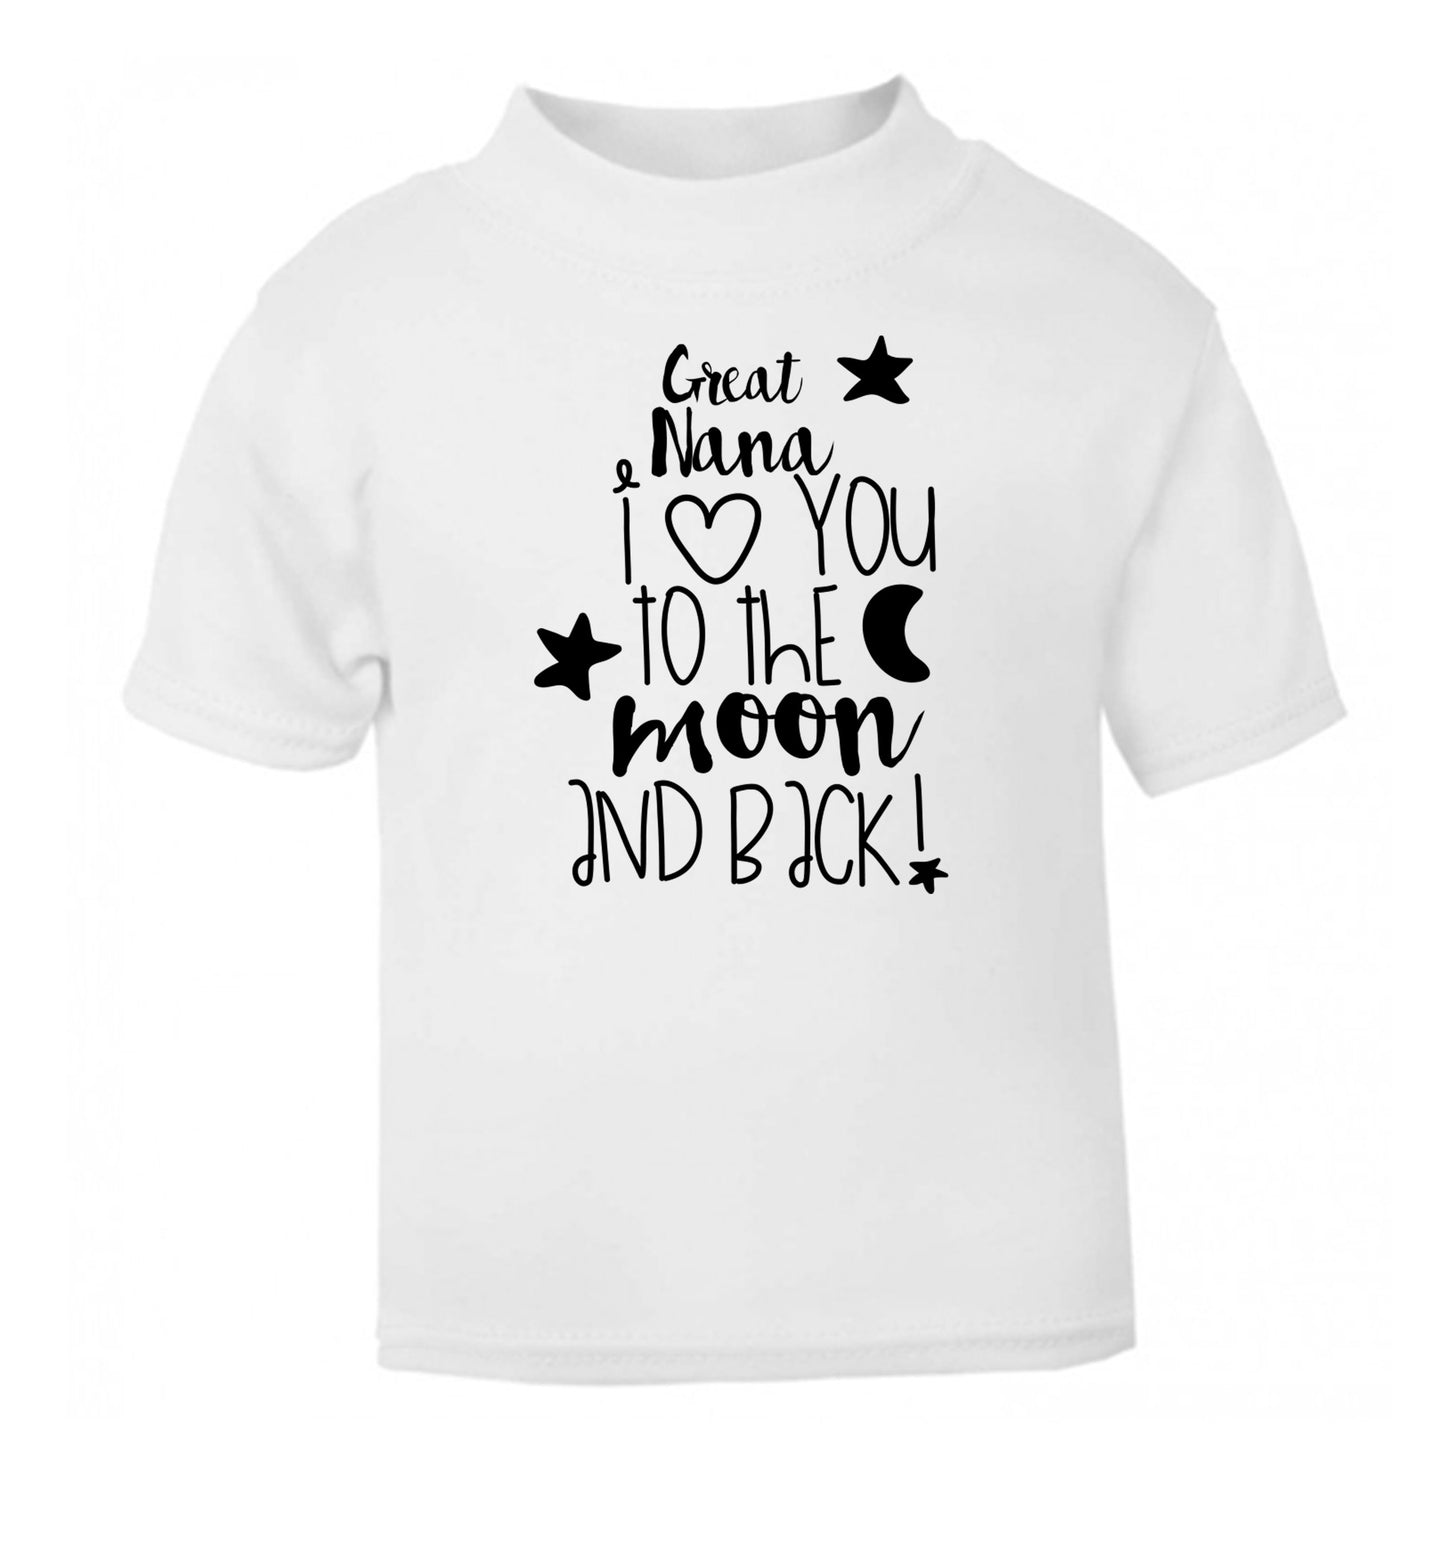 Great Nana I love you to the moon and back white Baby Toddler Tshirt 2 Years